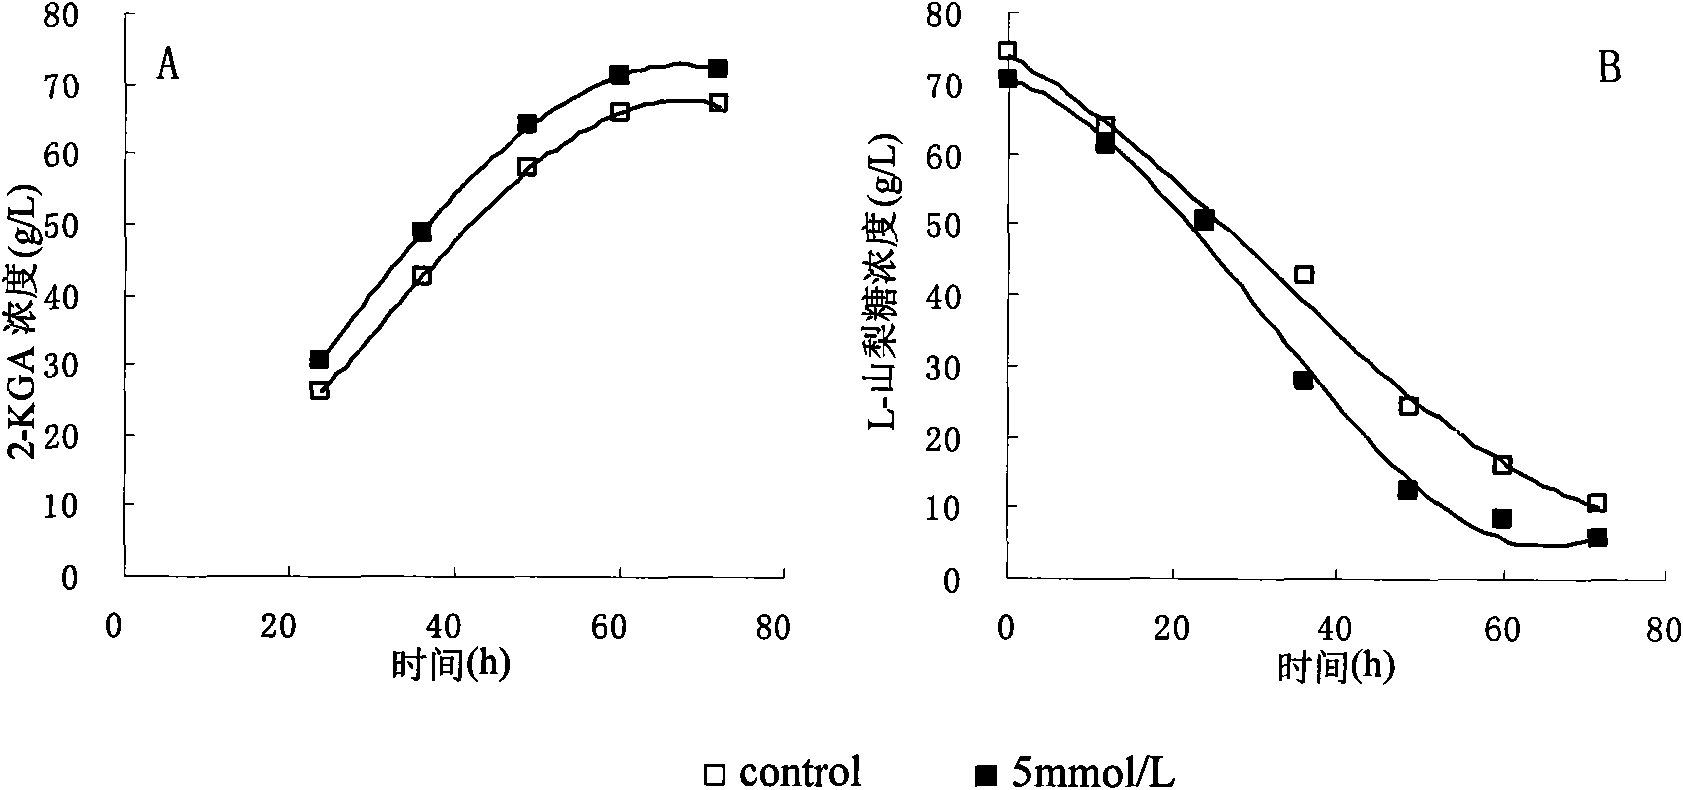 Method for efficiently producing rare earth element reinforced 2-keto-L-gulonic acid